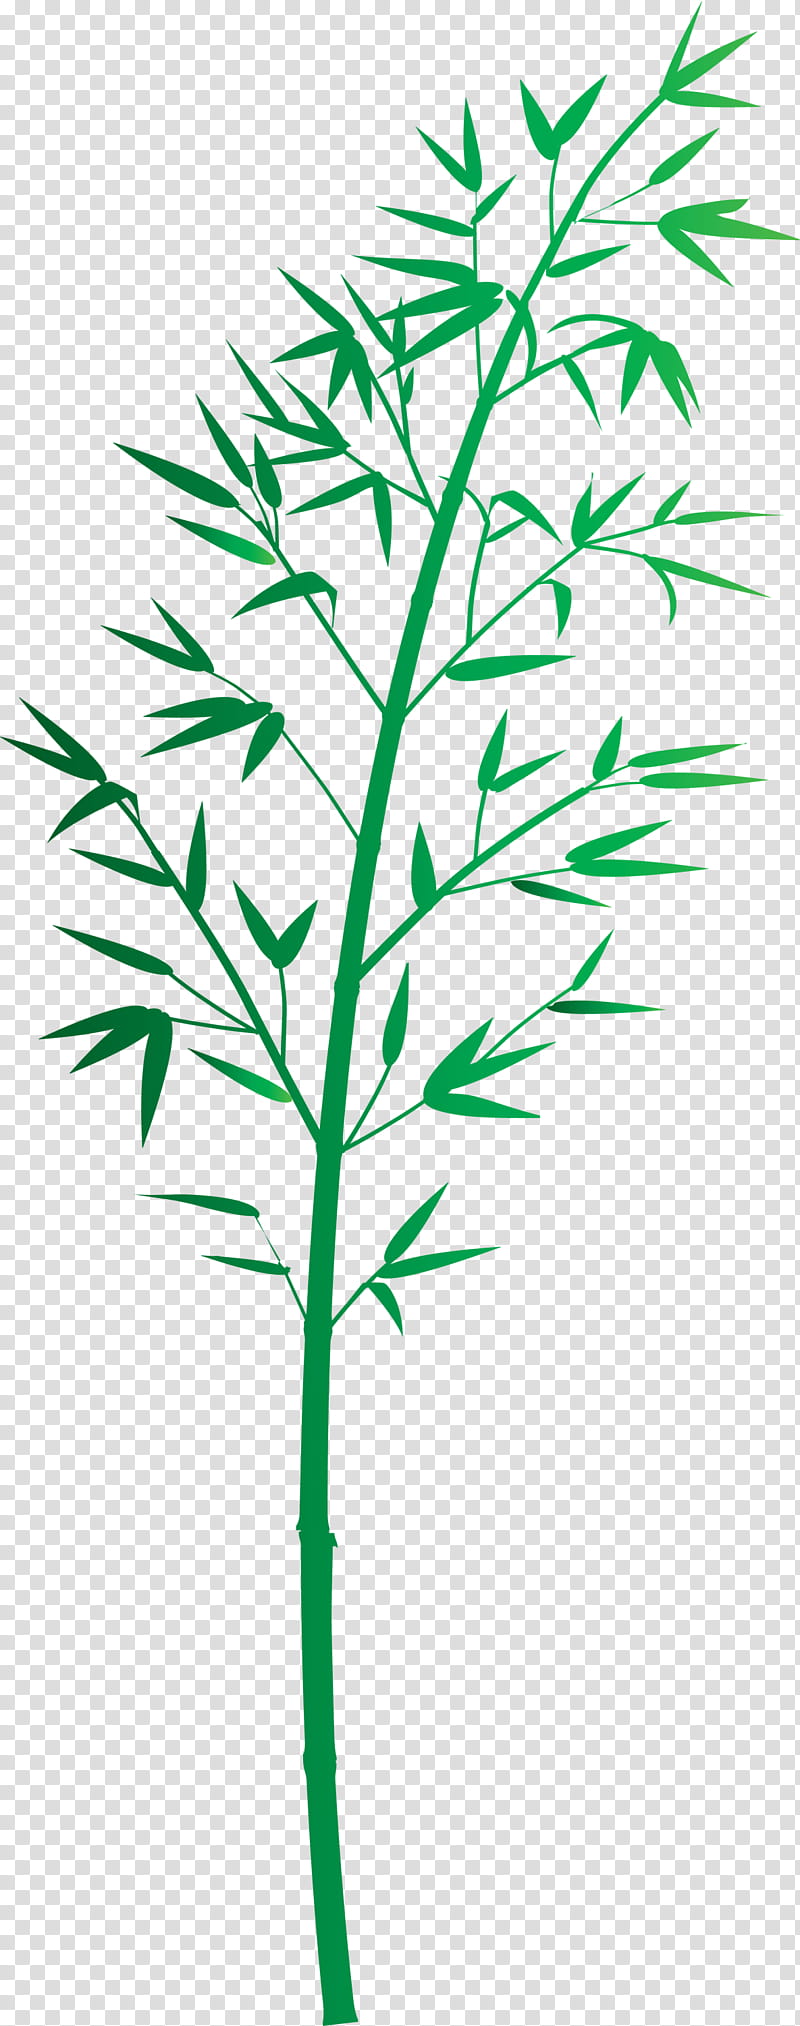 bamboo leaf, Plant, Plant Stem, Flower, Grass Family, Tree, Pedicel, Herbaceous Plant transparent background PNG clipart